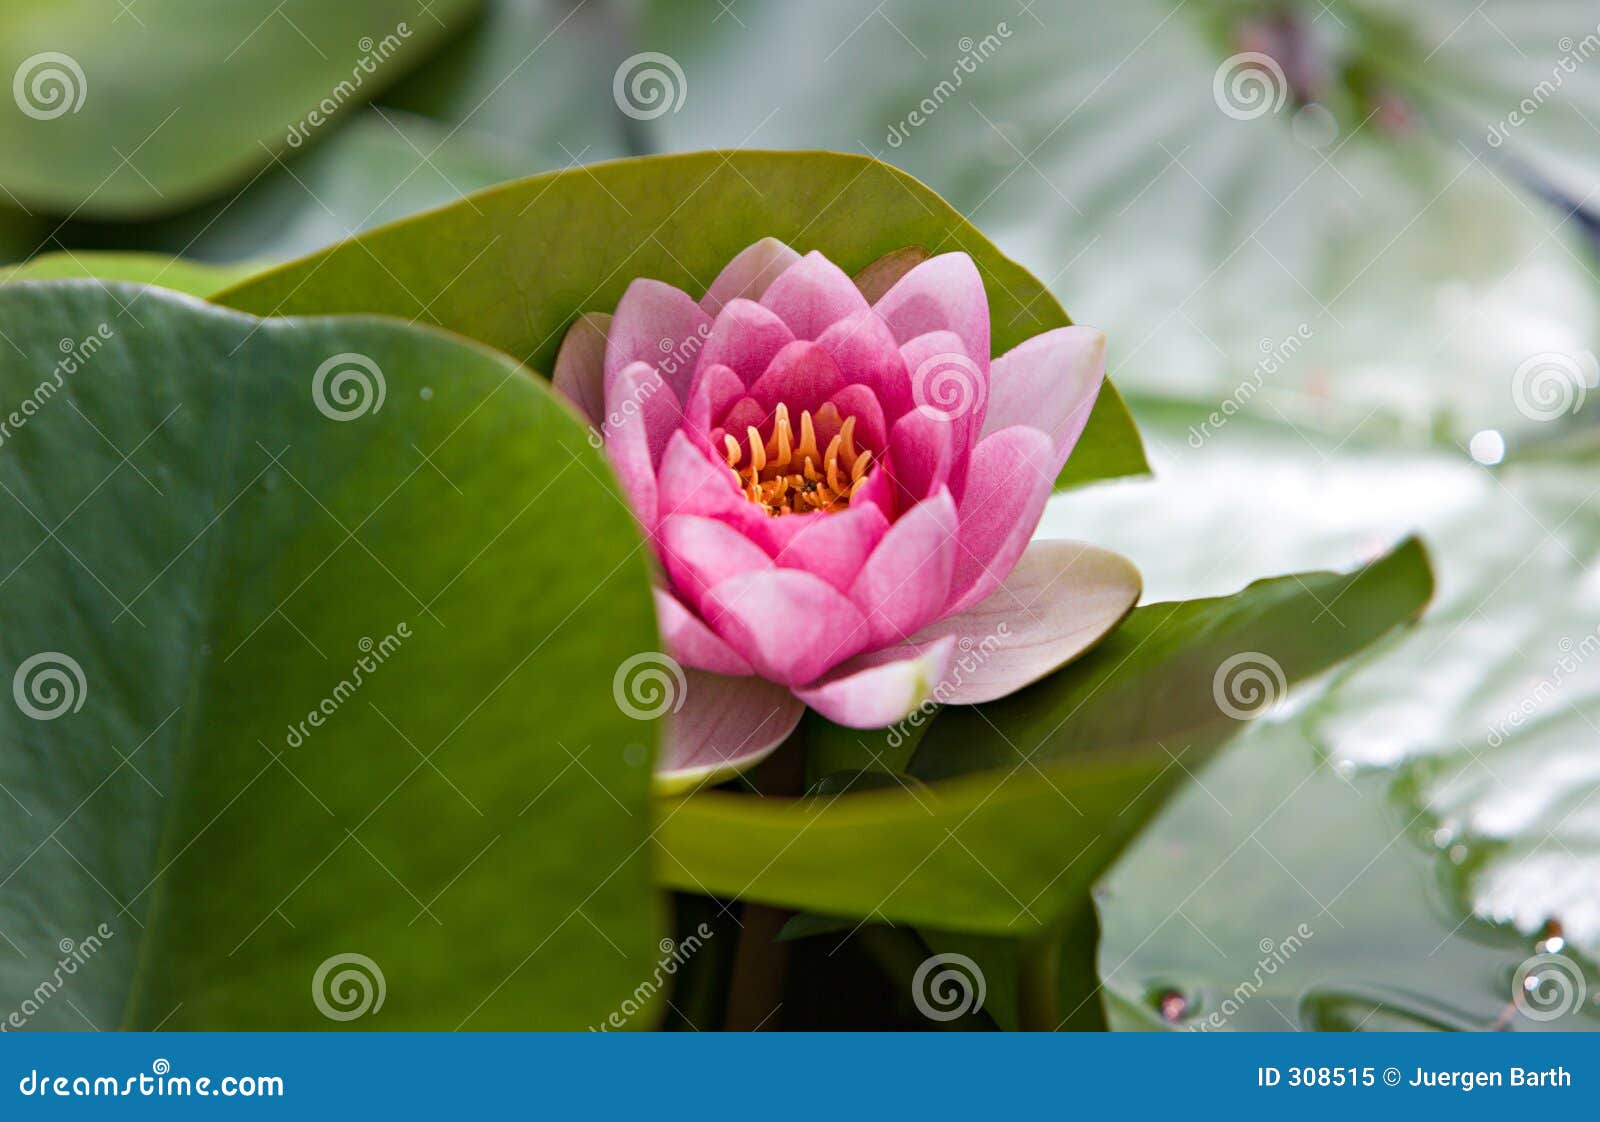 Water Lily, South Africa. Water lily in Helderberg Nature Reserve, South Africa